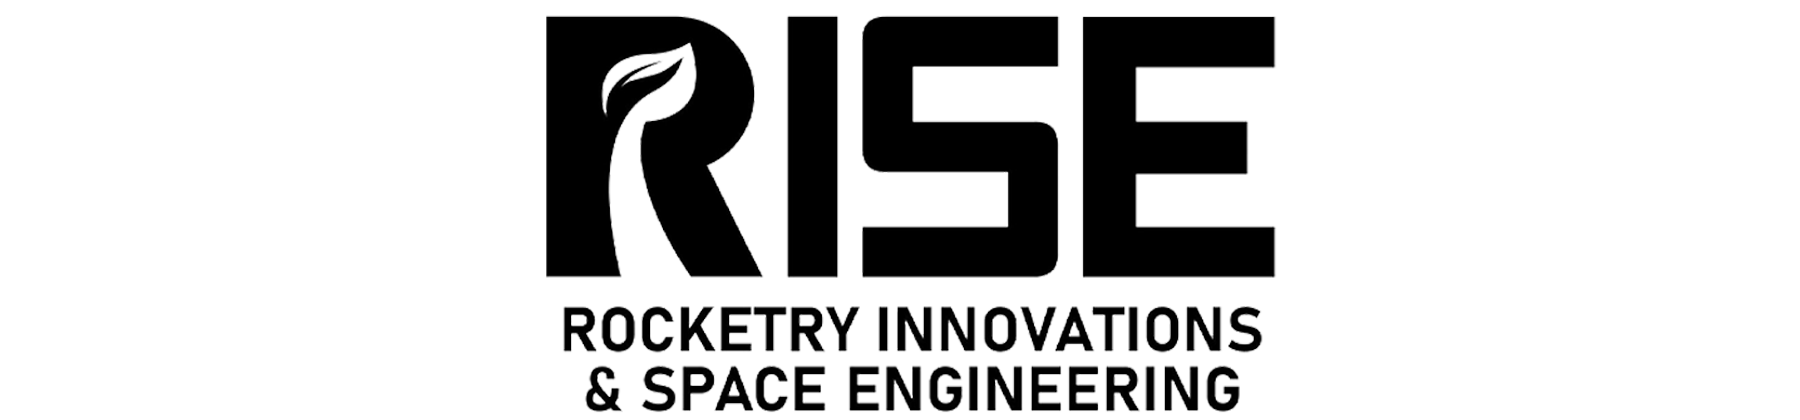 Rocketry Innovations & Space Engineering